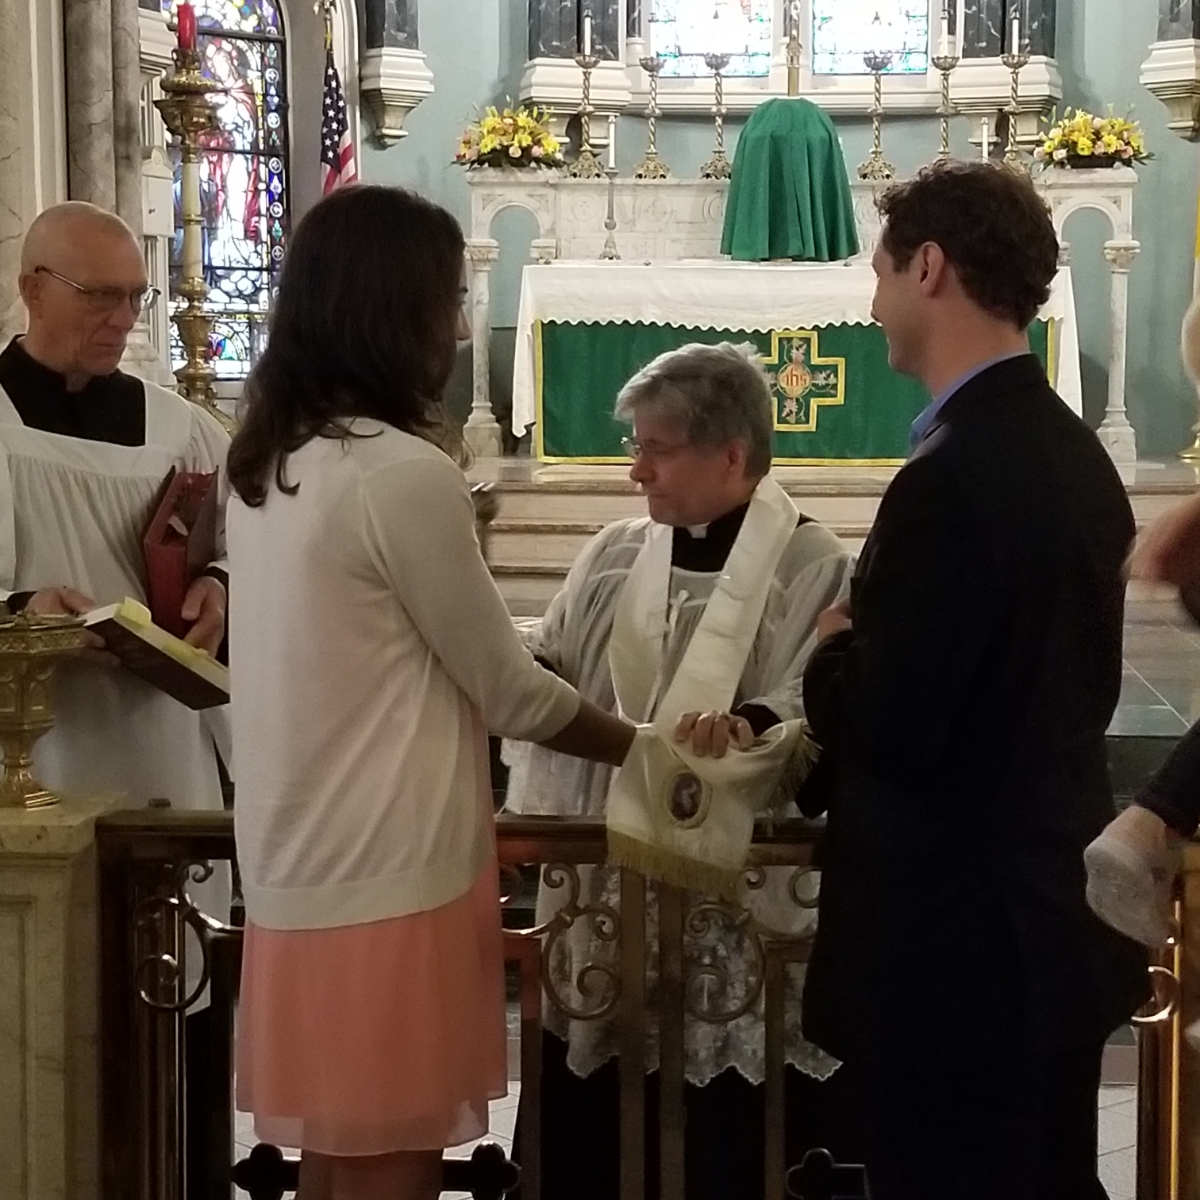 New Liturgical Movement: A Liturgical Rite of Betrothal